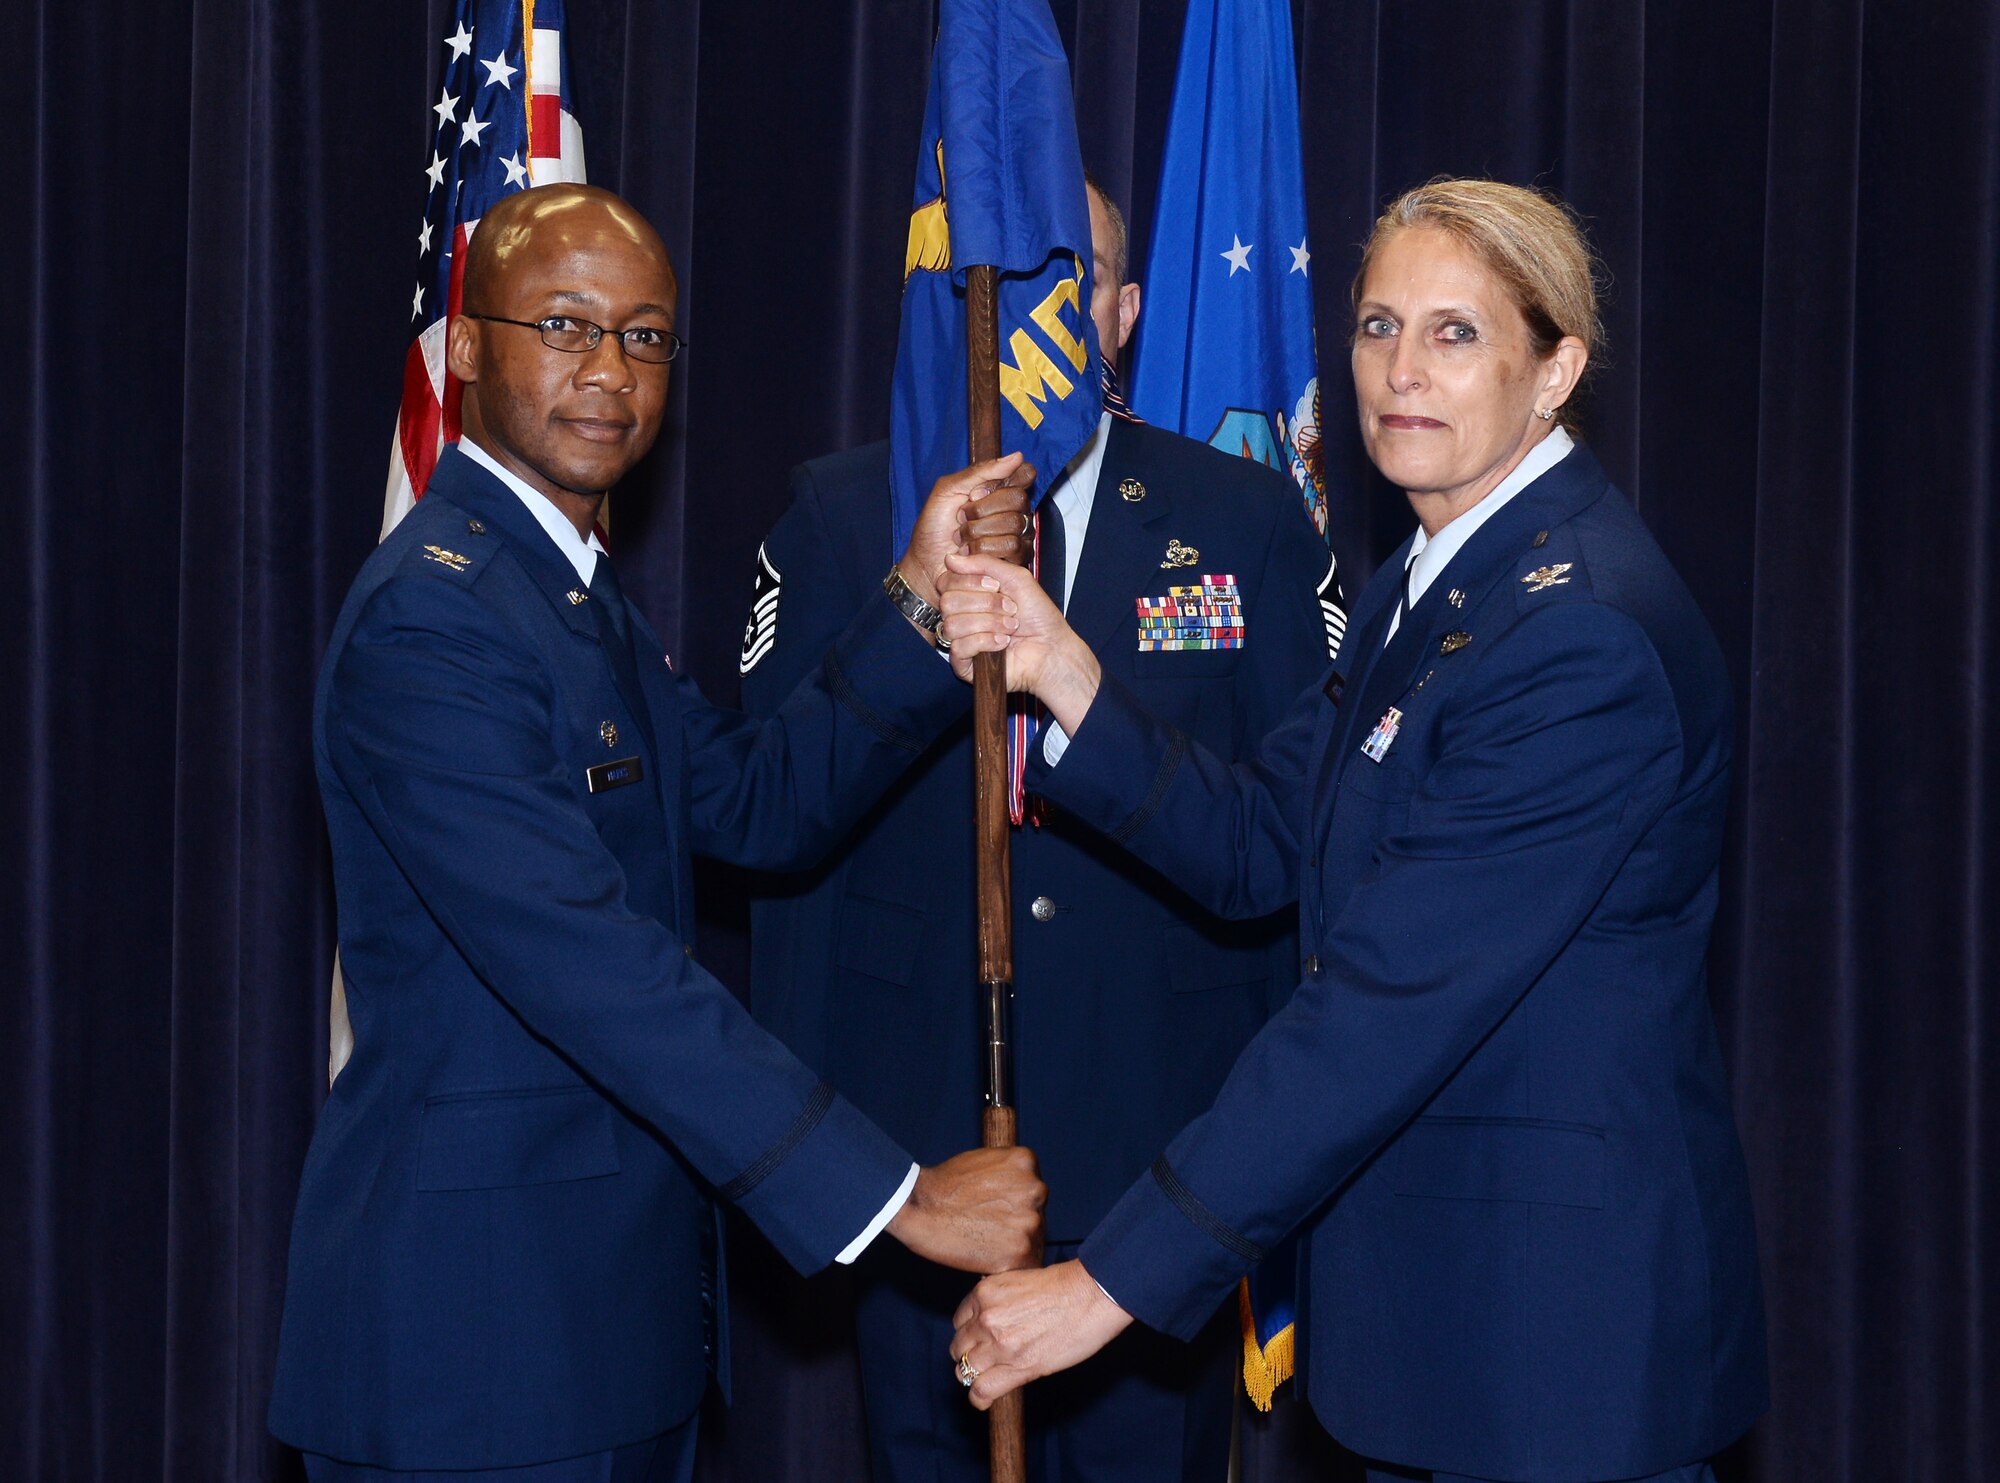 Col. Gavin Marks, 55th Wing commander, passes the 55th Medical Group guidon to Col. Julie Ostrand, during the 55th Medical Group Change of Command ceremony July 11, 2019, inside the 557th Weather Wing auditorium at Offutt Air Force Base, Nebraska. Osrand assumed command from Col. Judy Stoltmann who is retiring soon from the Armed Forces.